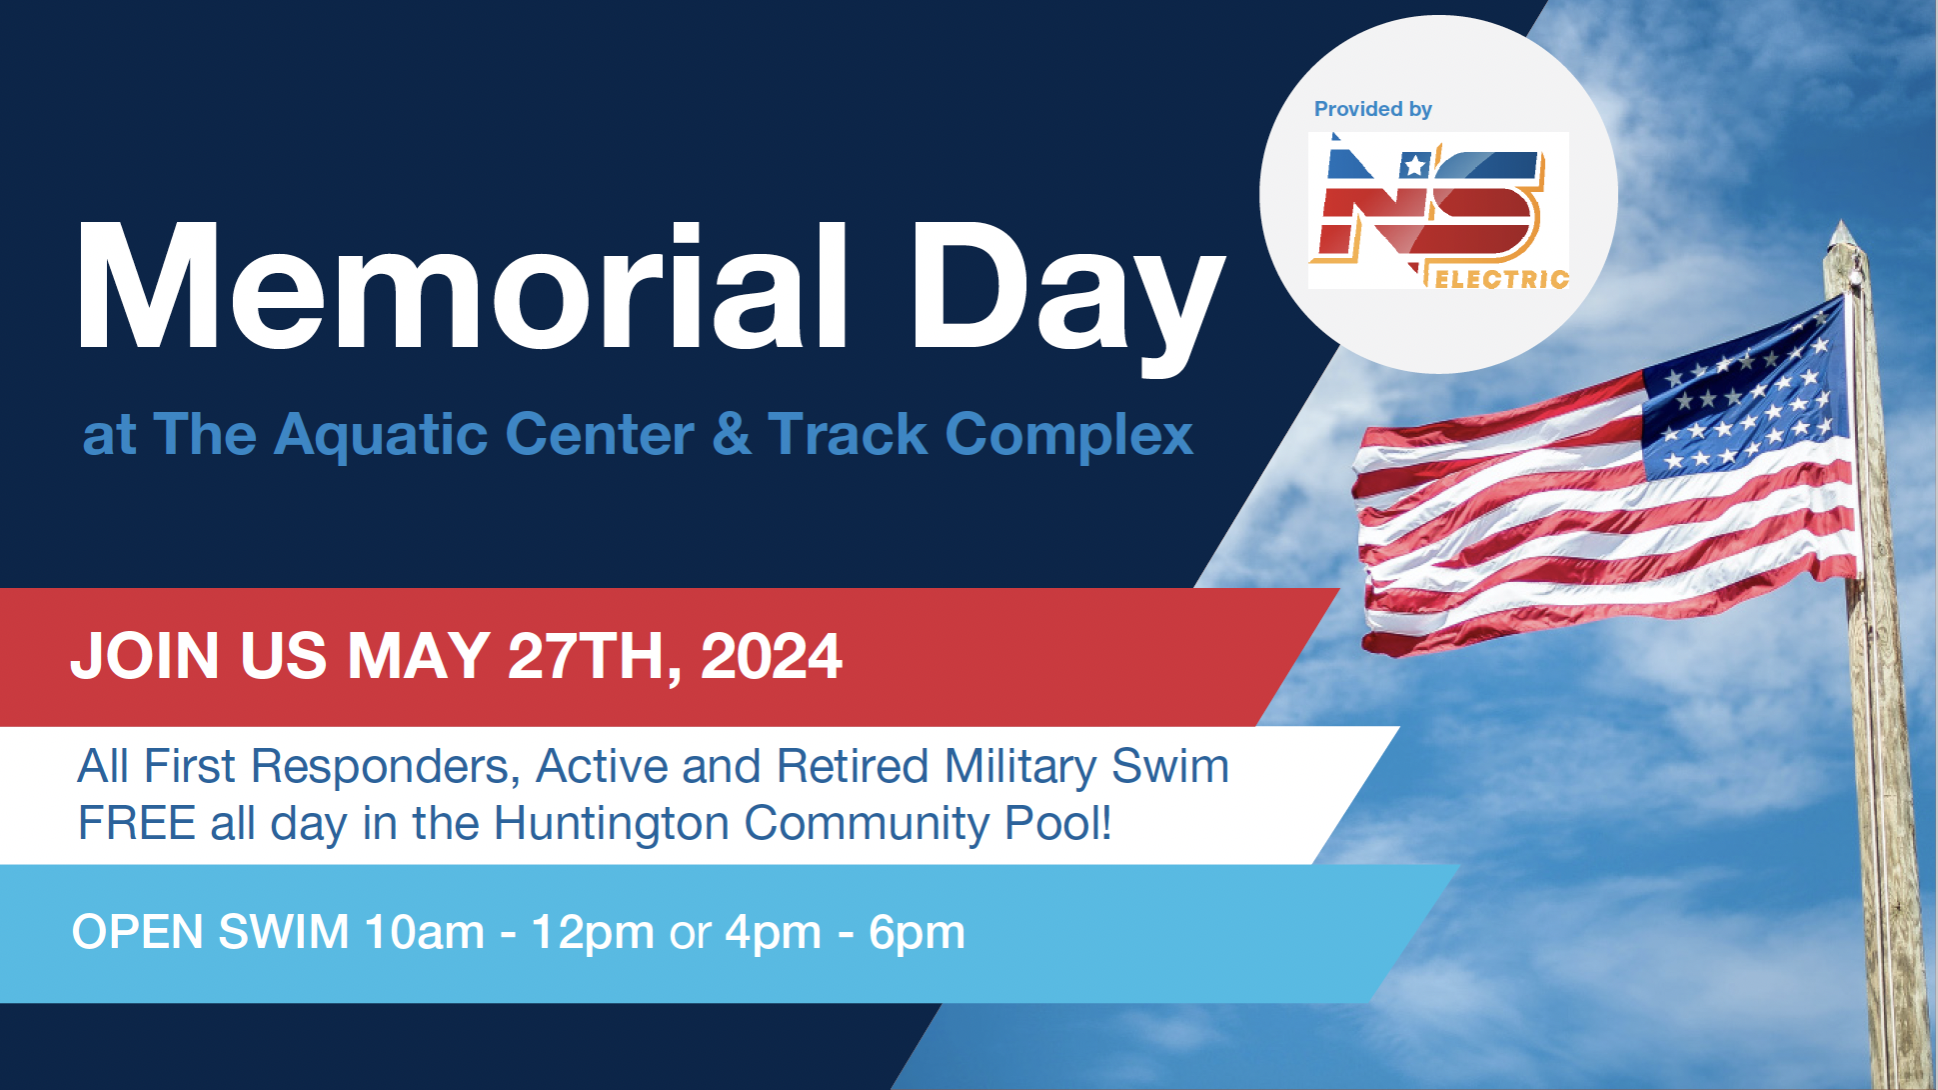 Memorial Day Heroes Swim Free Event Monday, May 27th, 2024 at The Aquatic Center at Mylan Park